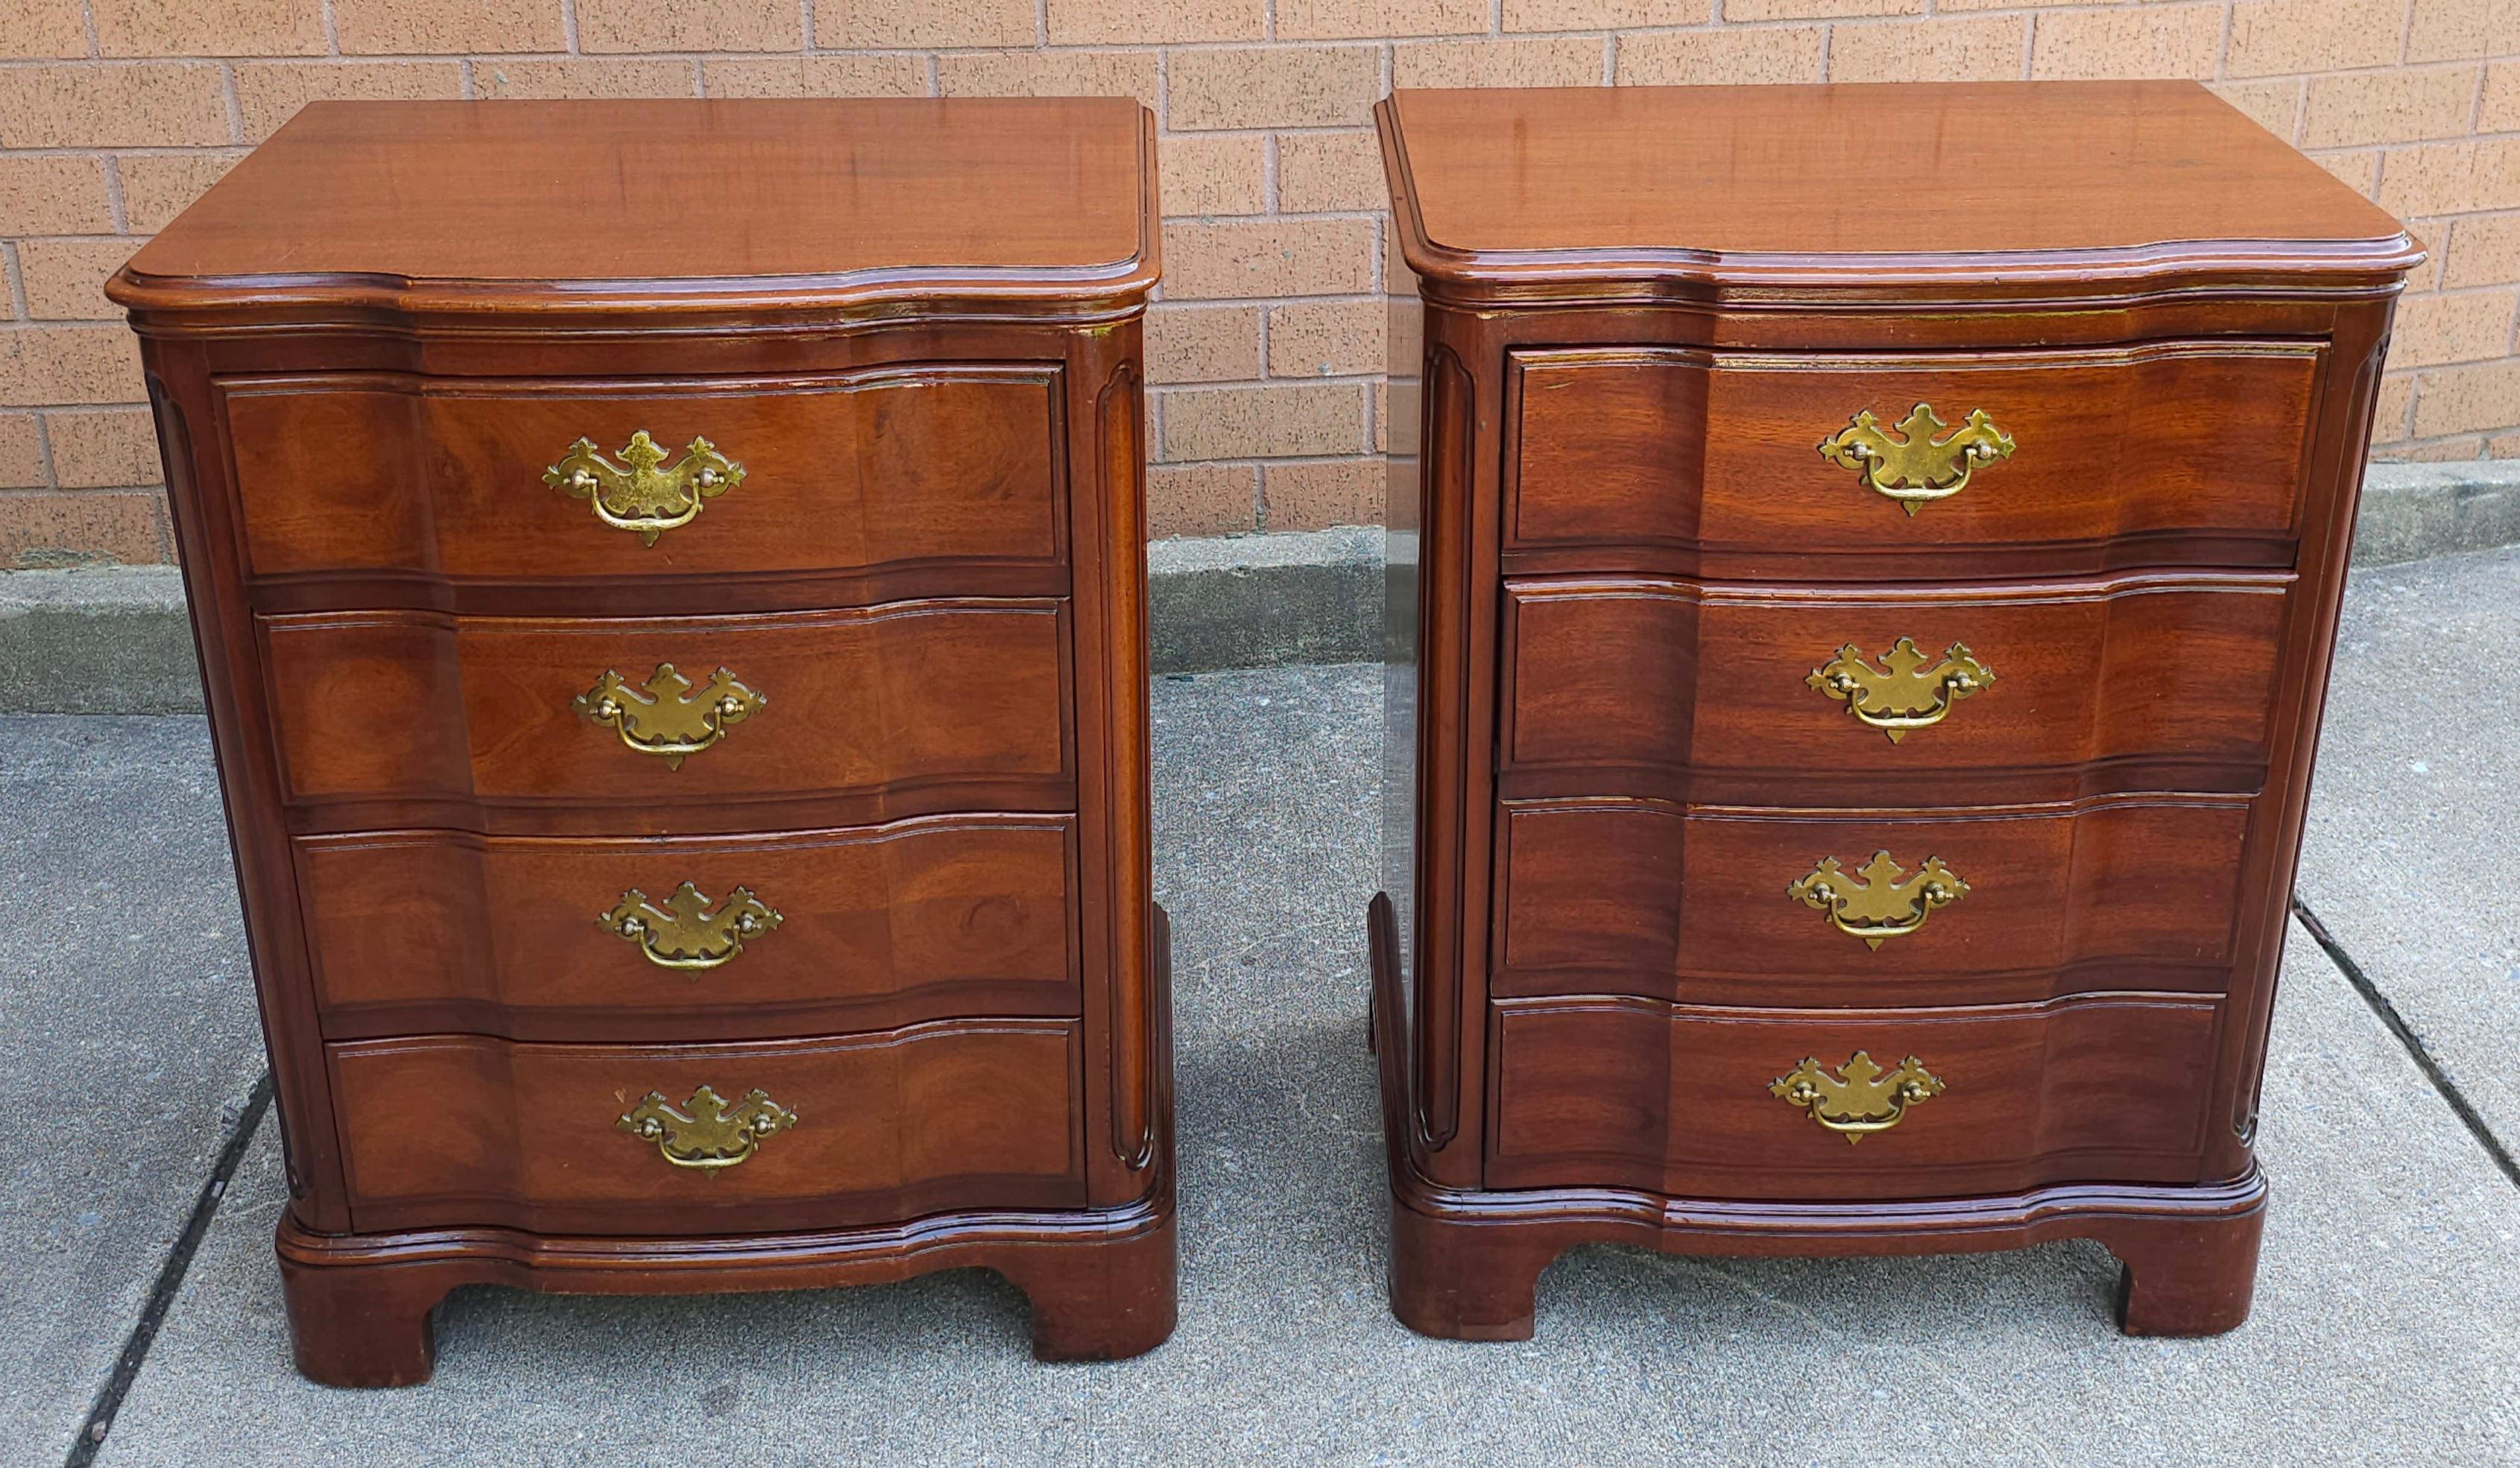 A Pair of John Widdicomb Co. George III Style Block Front Mahogany Bedside Chests / Nightstands. Measure 21